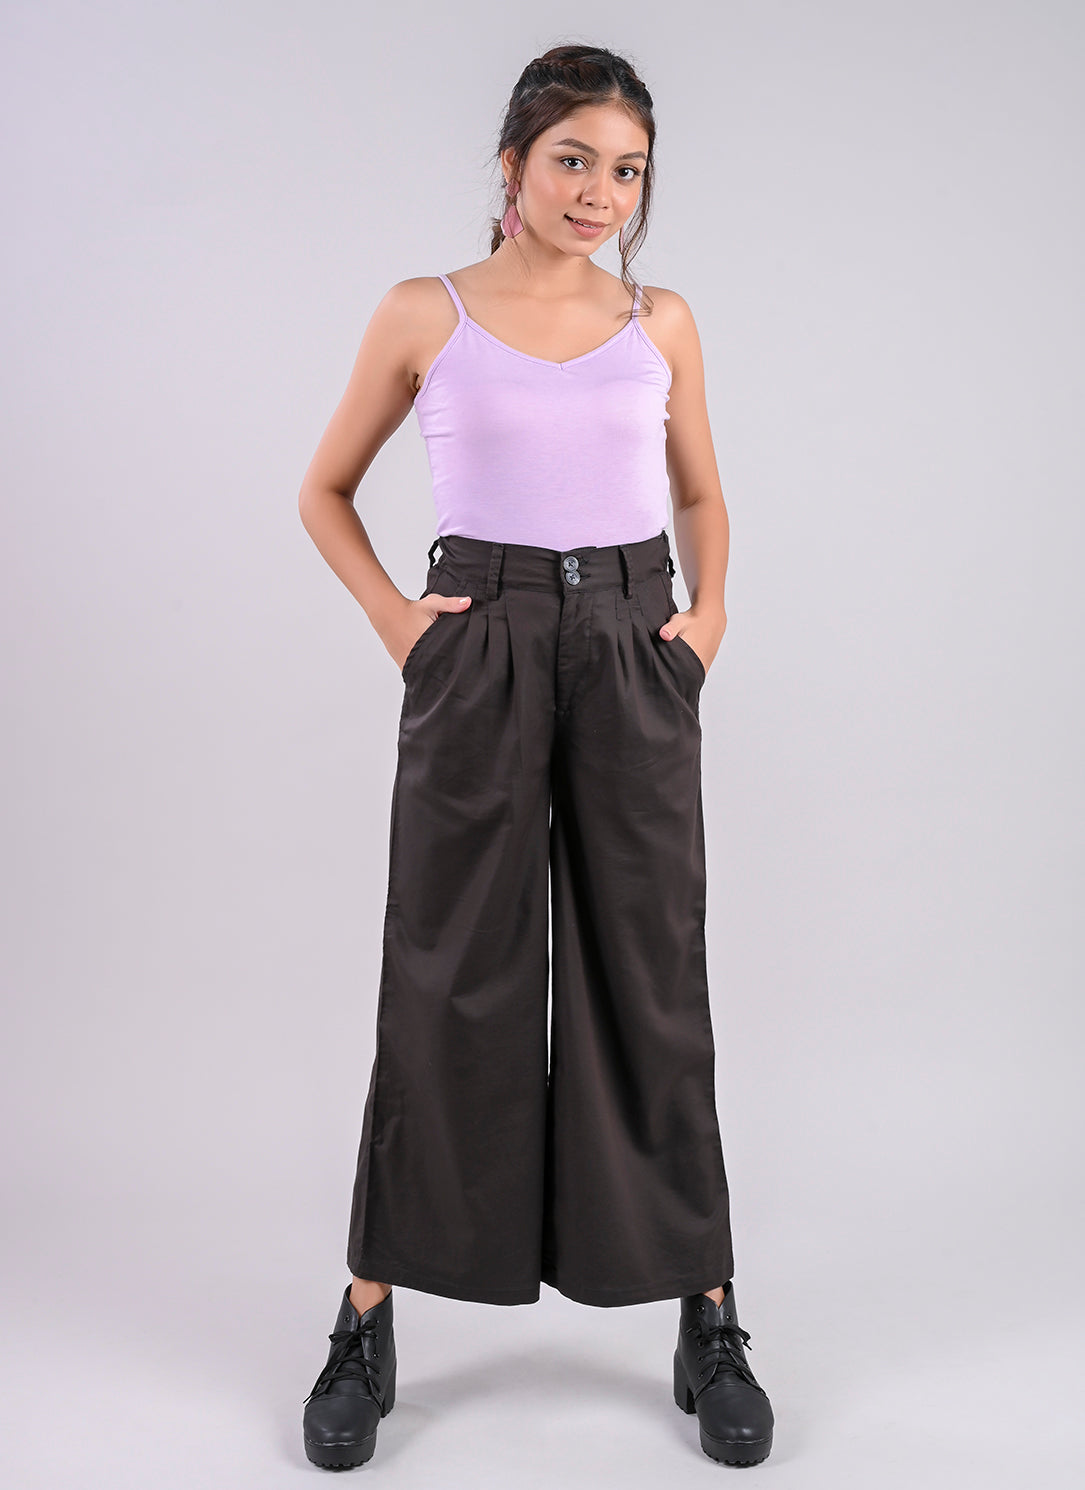 PLEATED PALAZZO PANTS IN CHARCOAL GREY